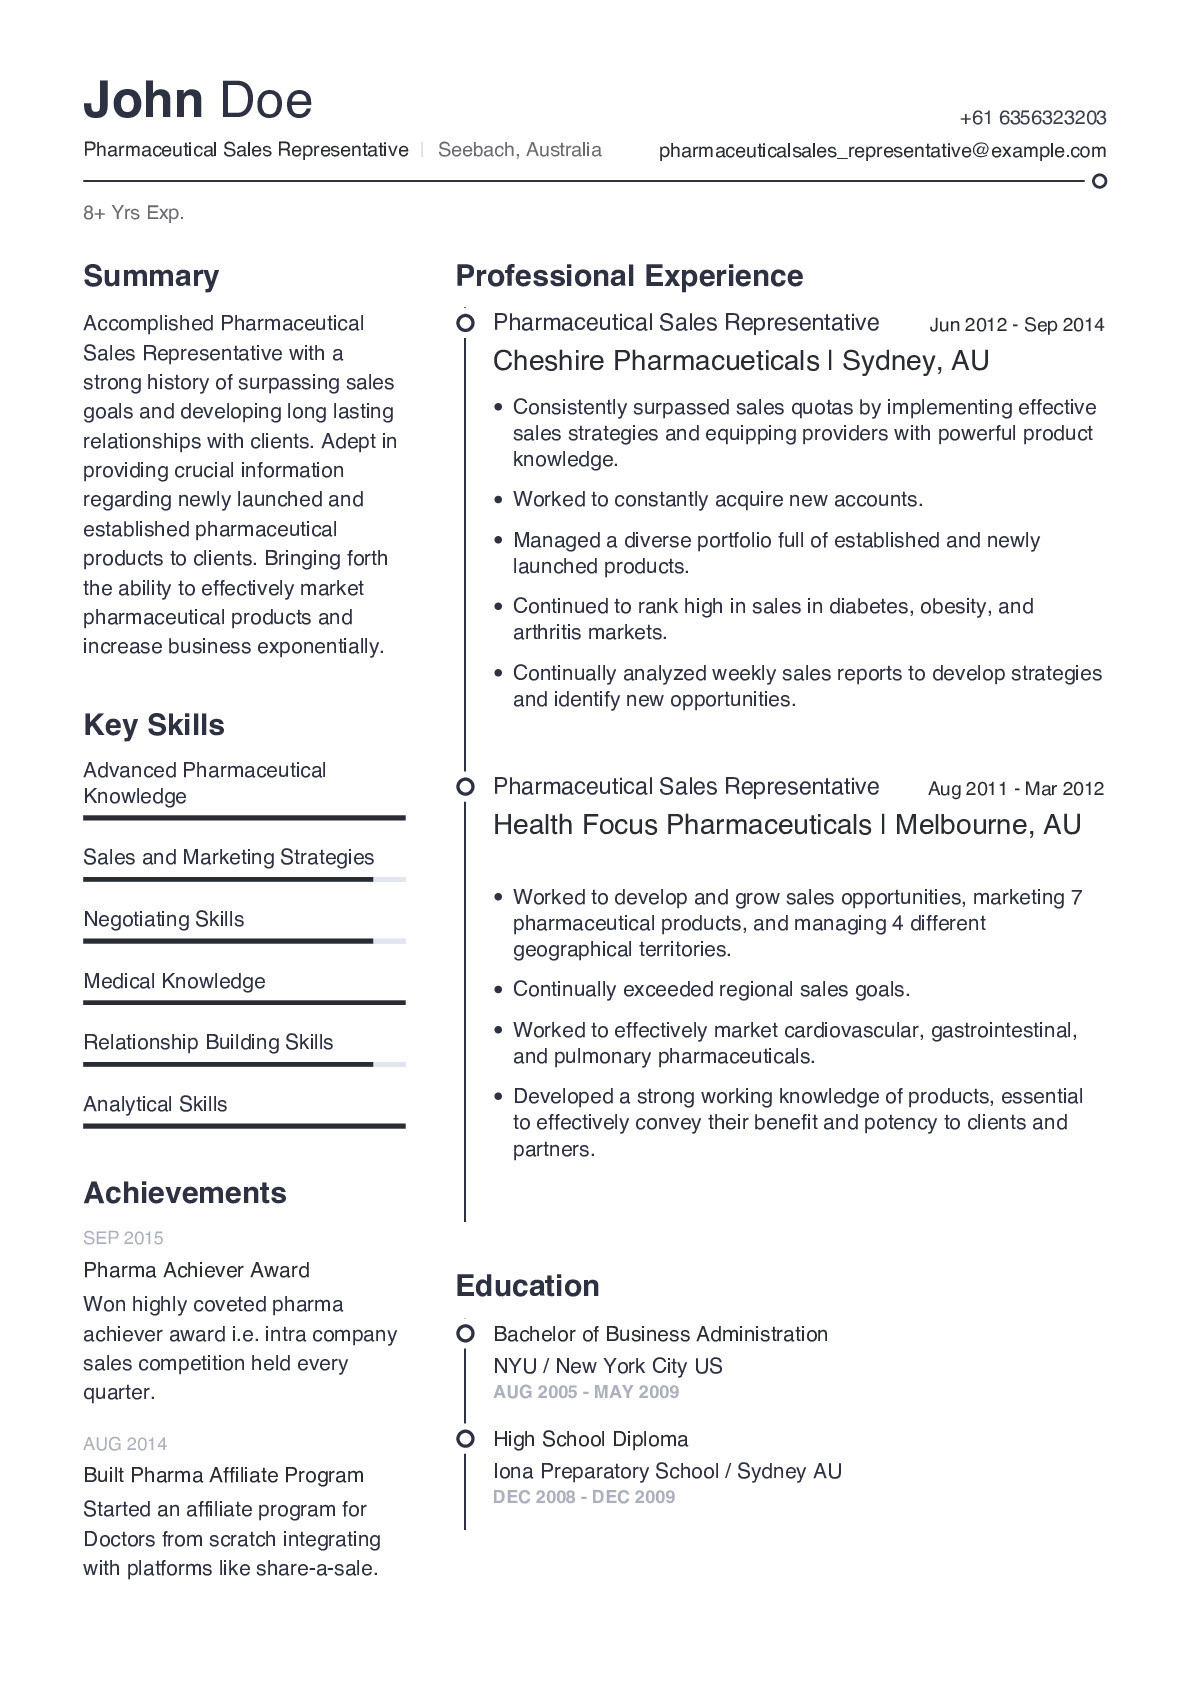 Sample Resumes for Pharmaceutical Sales Jobs Amazing Pharmaceutical Sales Representative Resume Templates